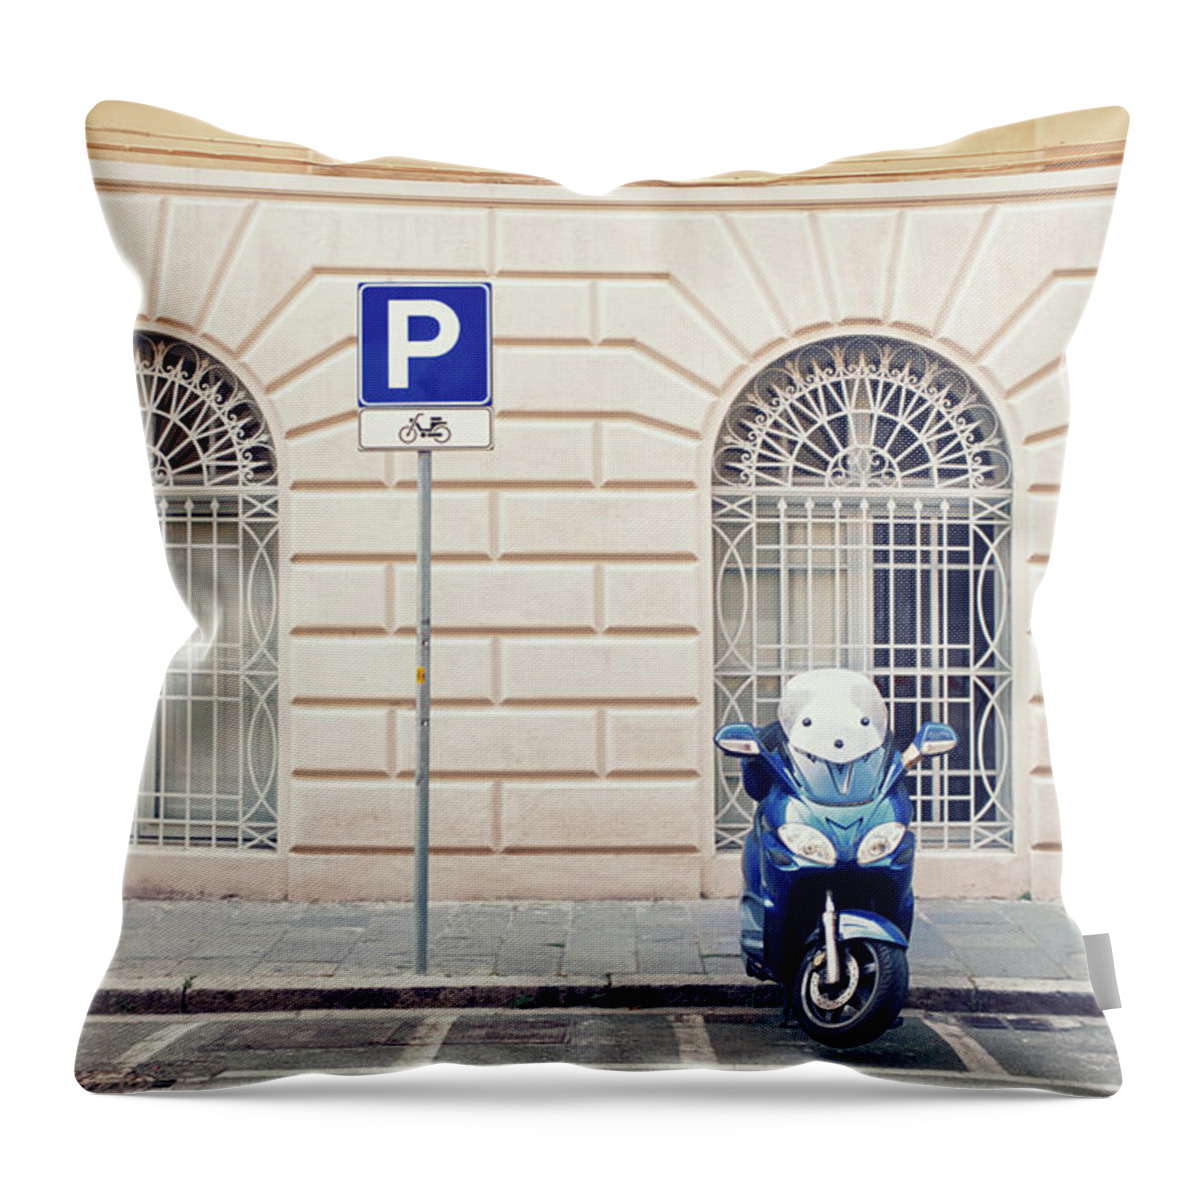 Sparse Throw Pillow featuring the photograph Italian Scooter Parked On The Street by Marcoventuriniautieri